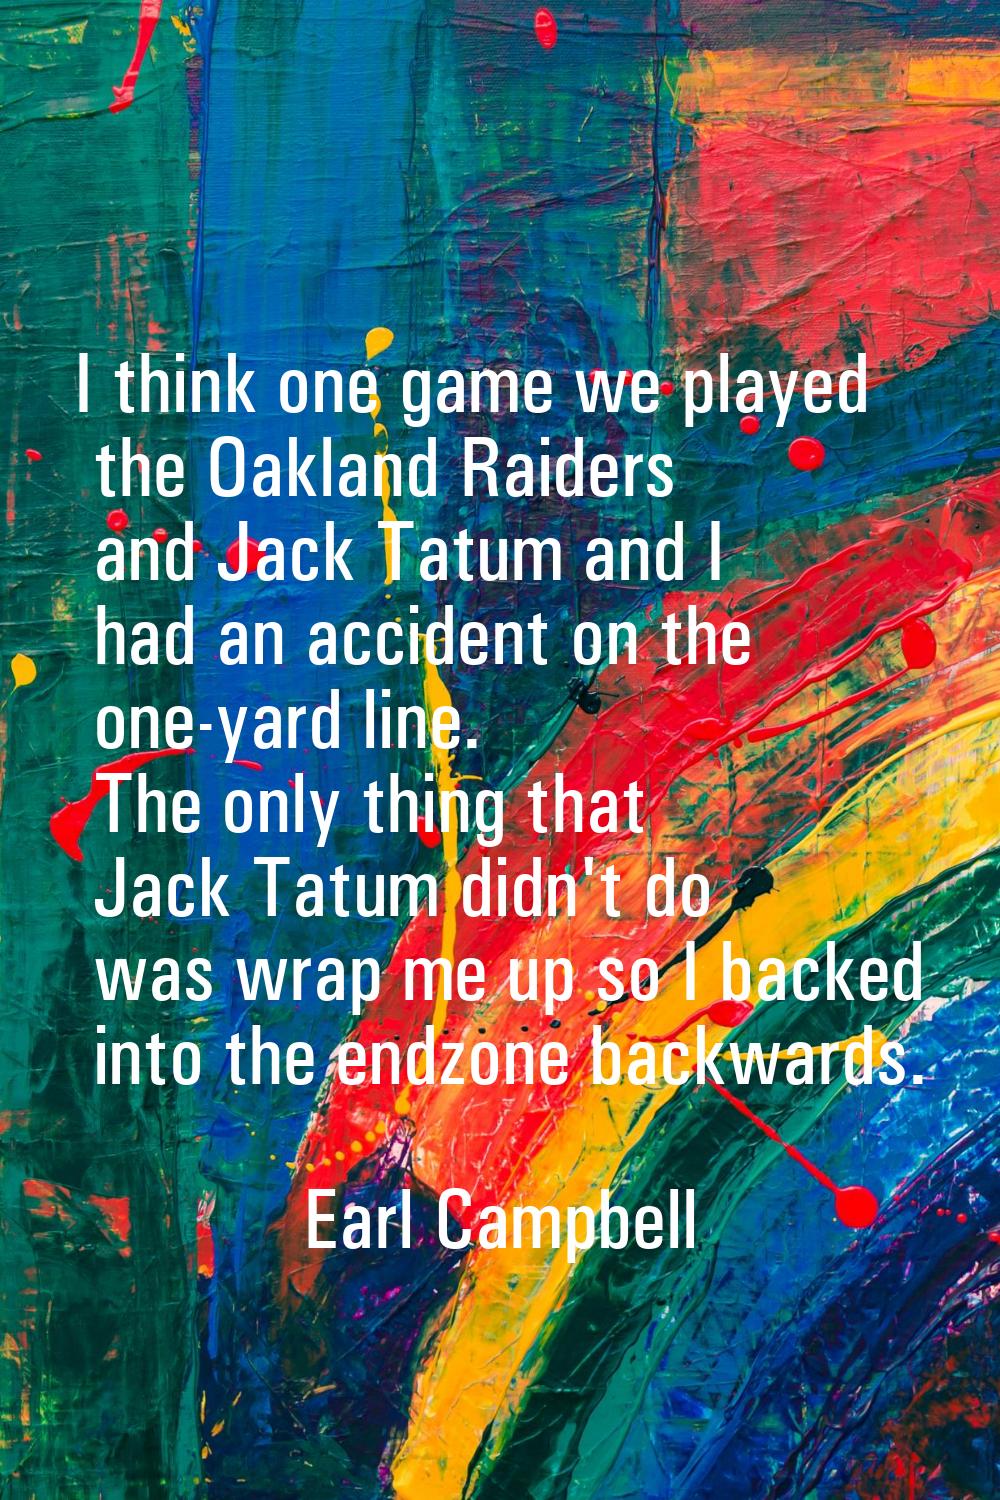 I think one game we played the Oakland Raiders and Jack Tatum and I had an accident on the one-yard